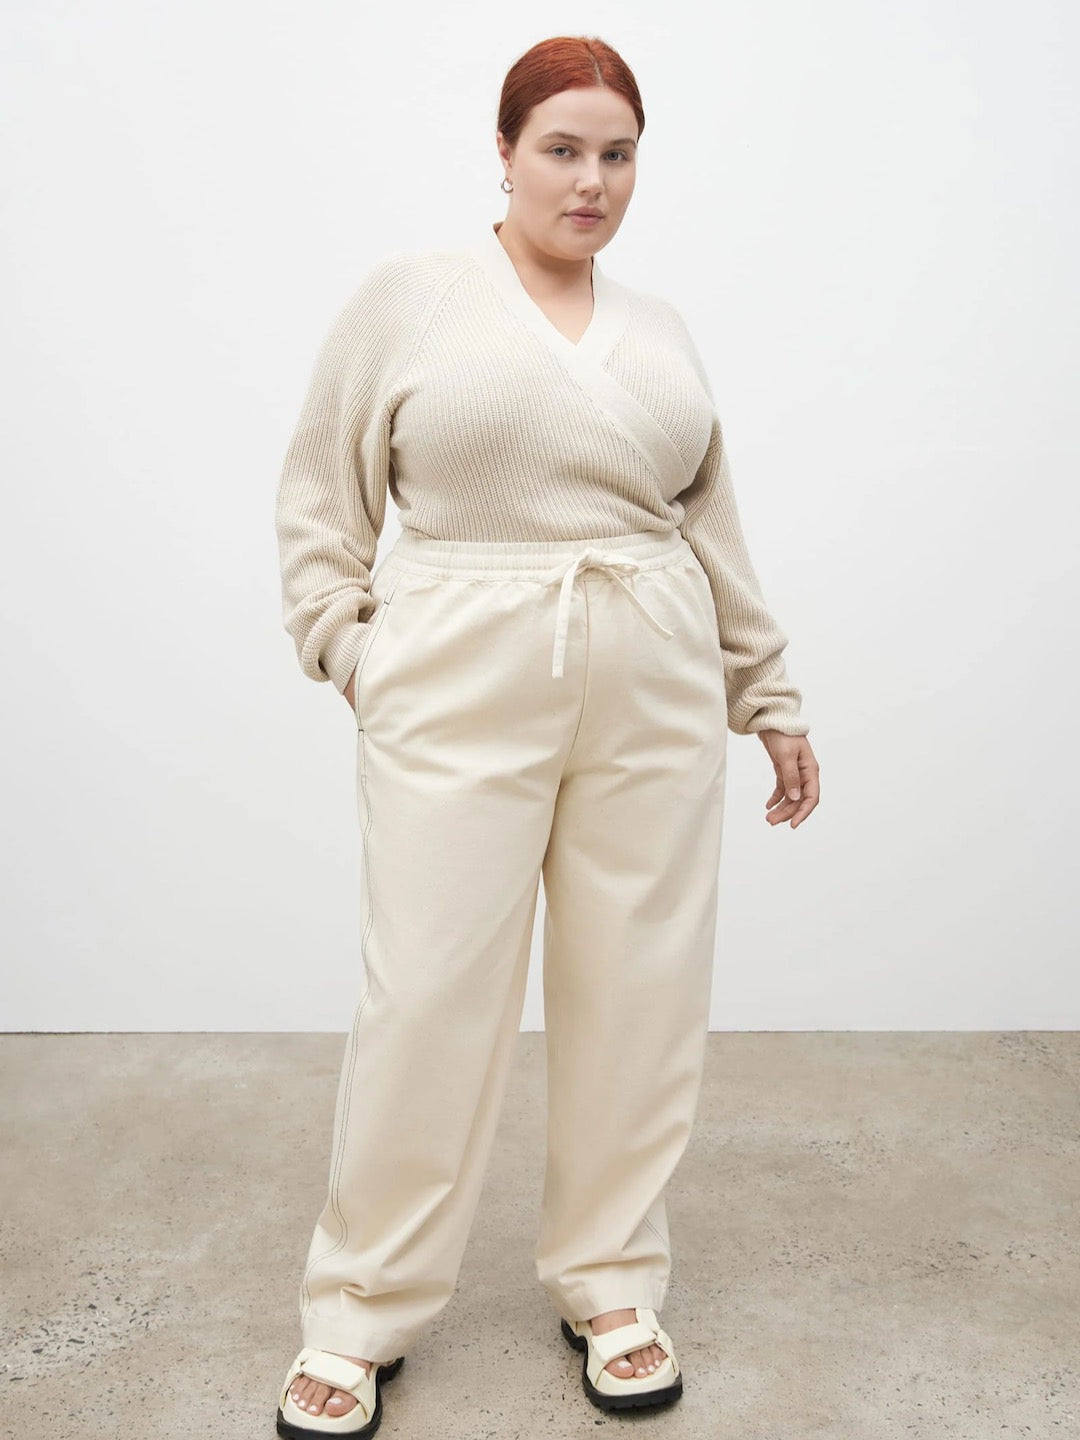 The model is wearing a cream sweater and Kowtow Blake Pants – Greige.